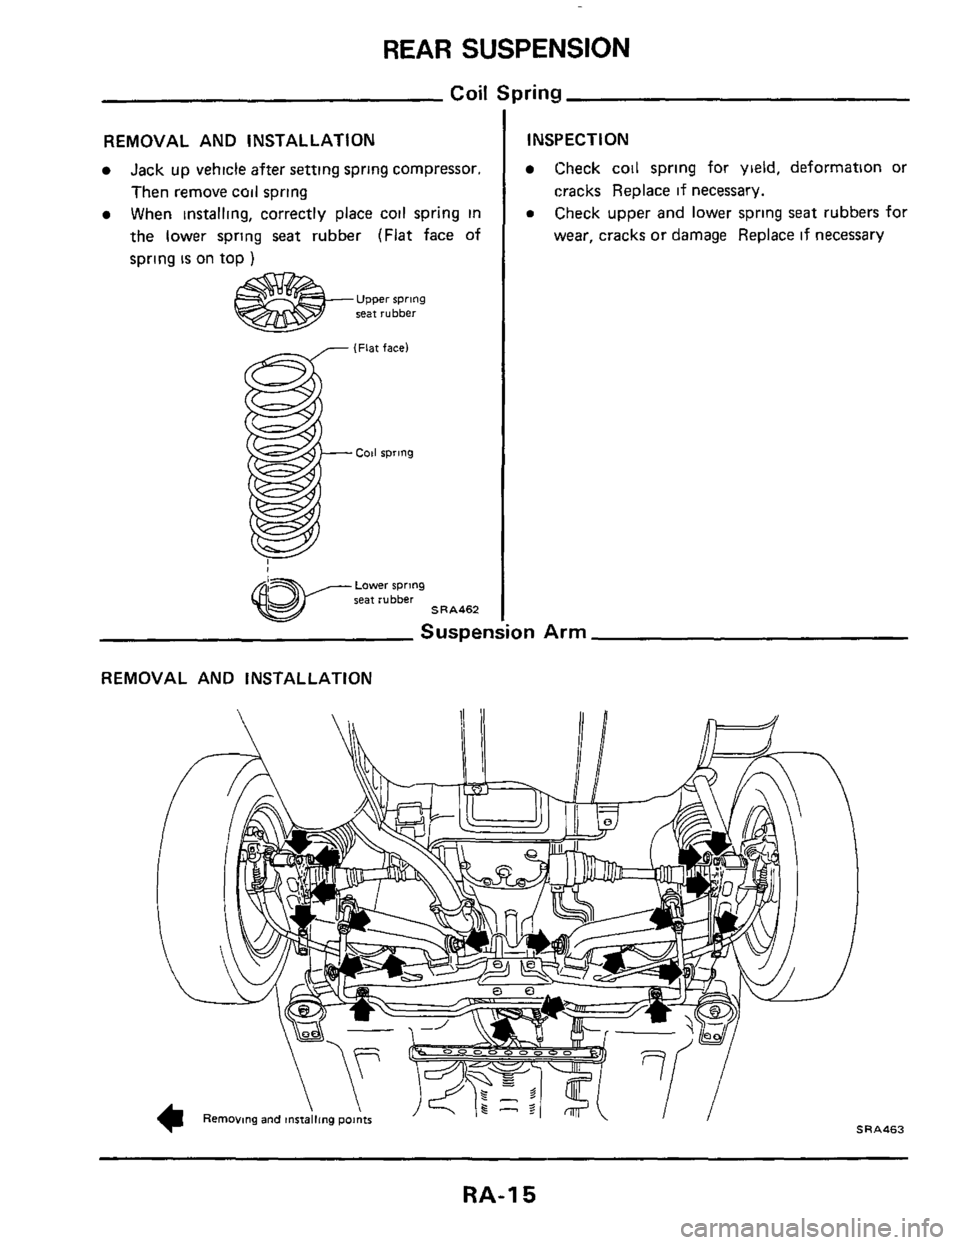 NISSAN 300ZX 1984 Z31 Rear Suspension User Guide REAR SUSPENSION 
Coil Spring 
REMOVAL AND INSTALLATION 
Jack up vehicle  after setting  spring compressor. 
Then  remove  coil spring 
When  installing,  correctly place coil spring  in 
the  lower  s